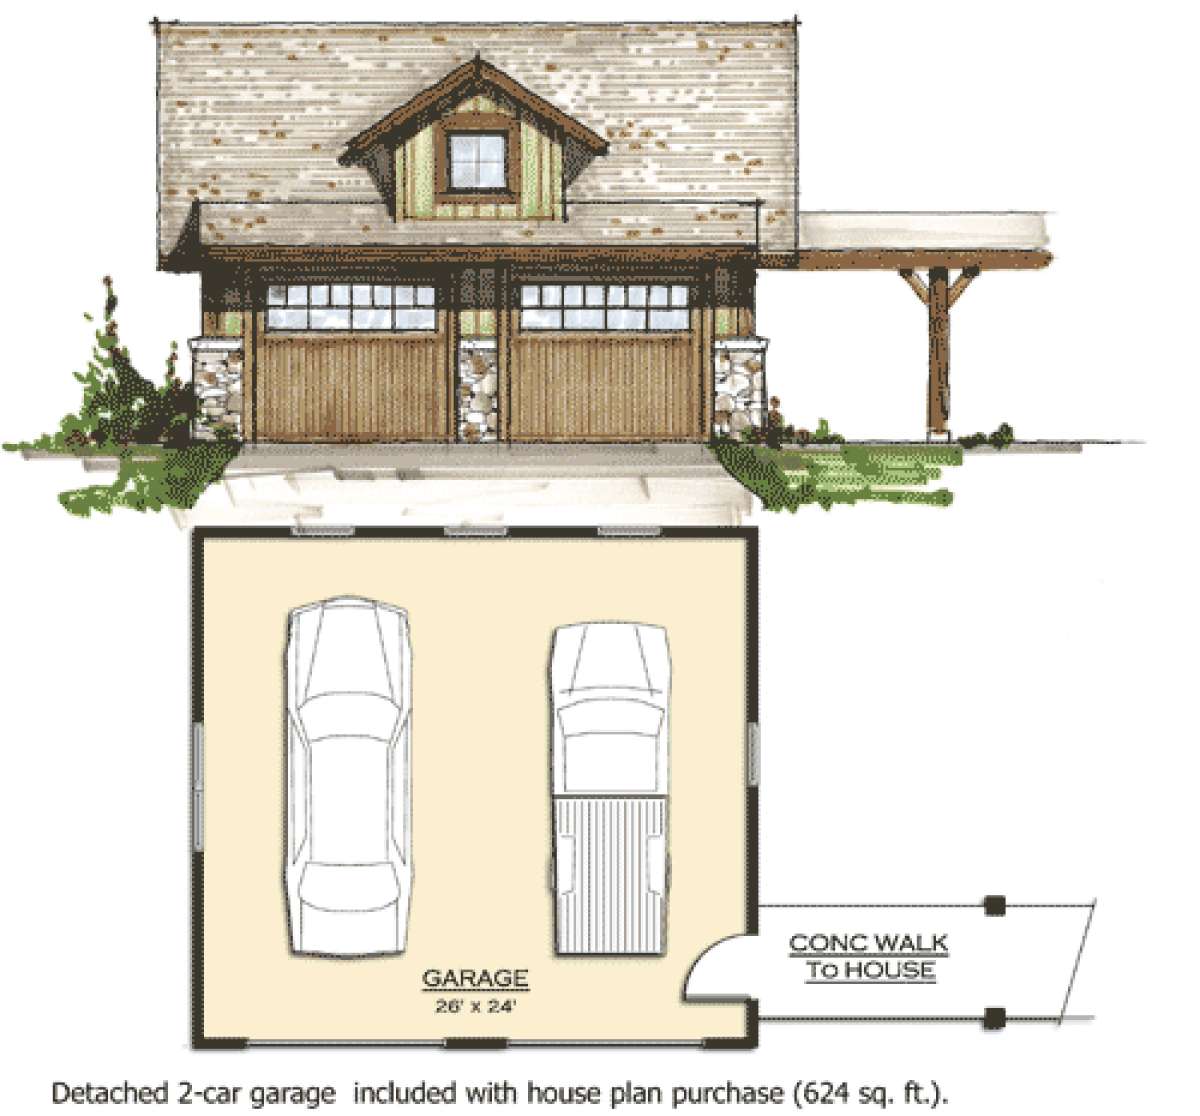 Garage for House Plan #8504-00027